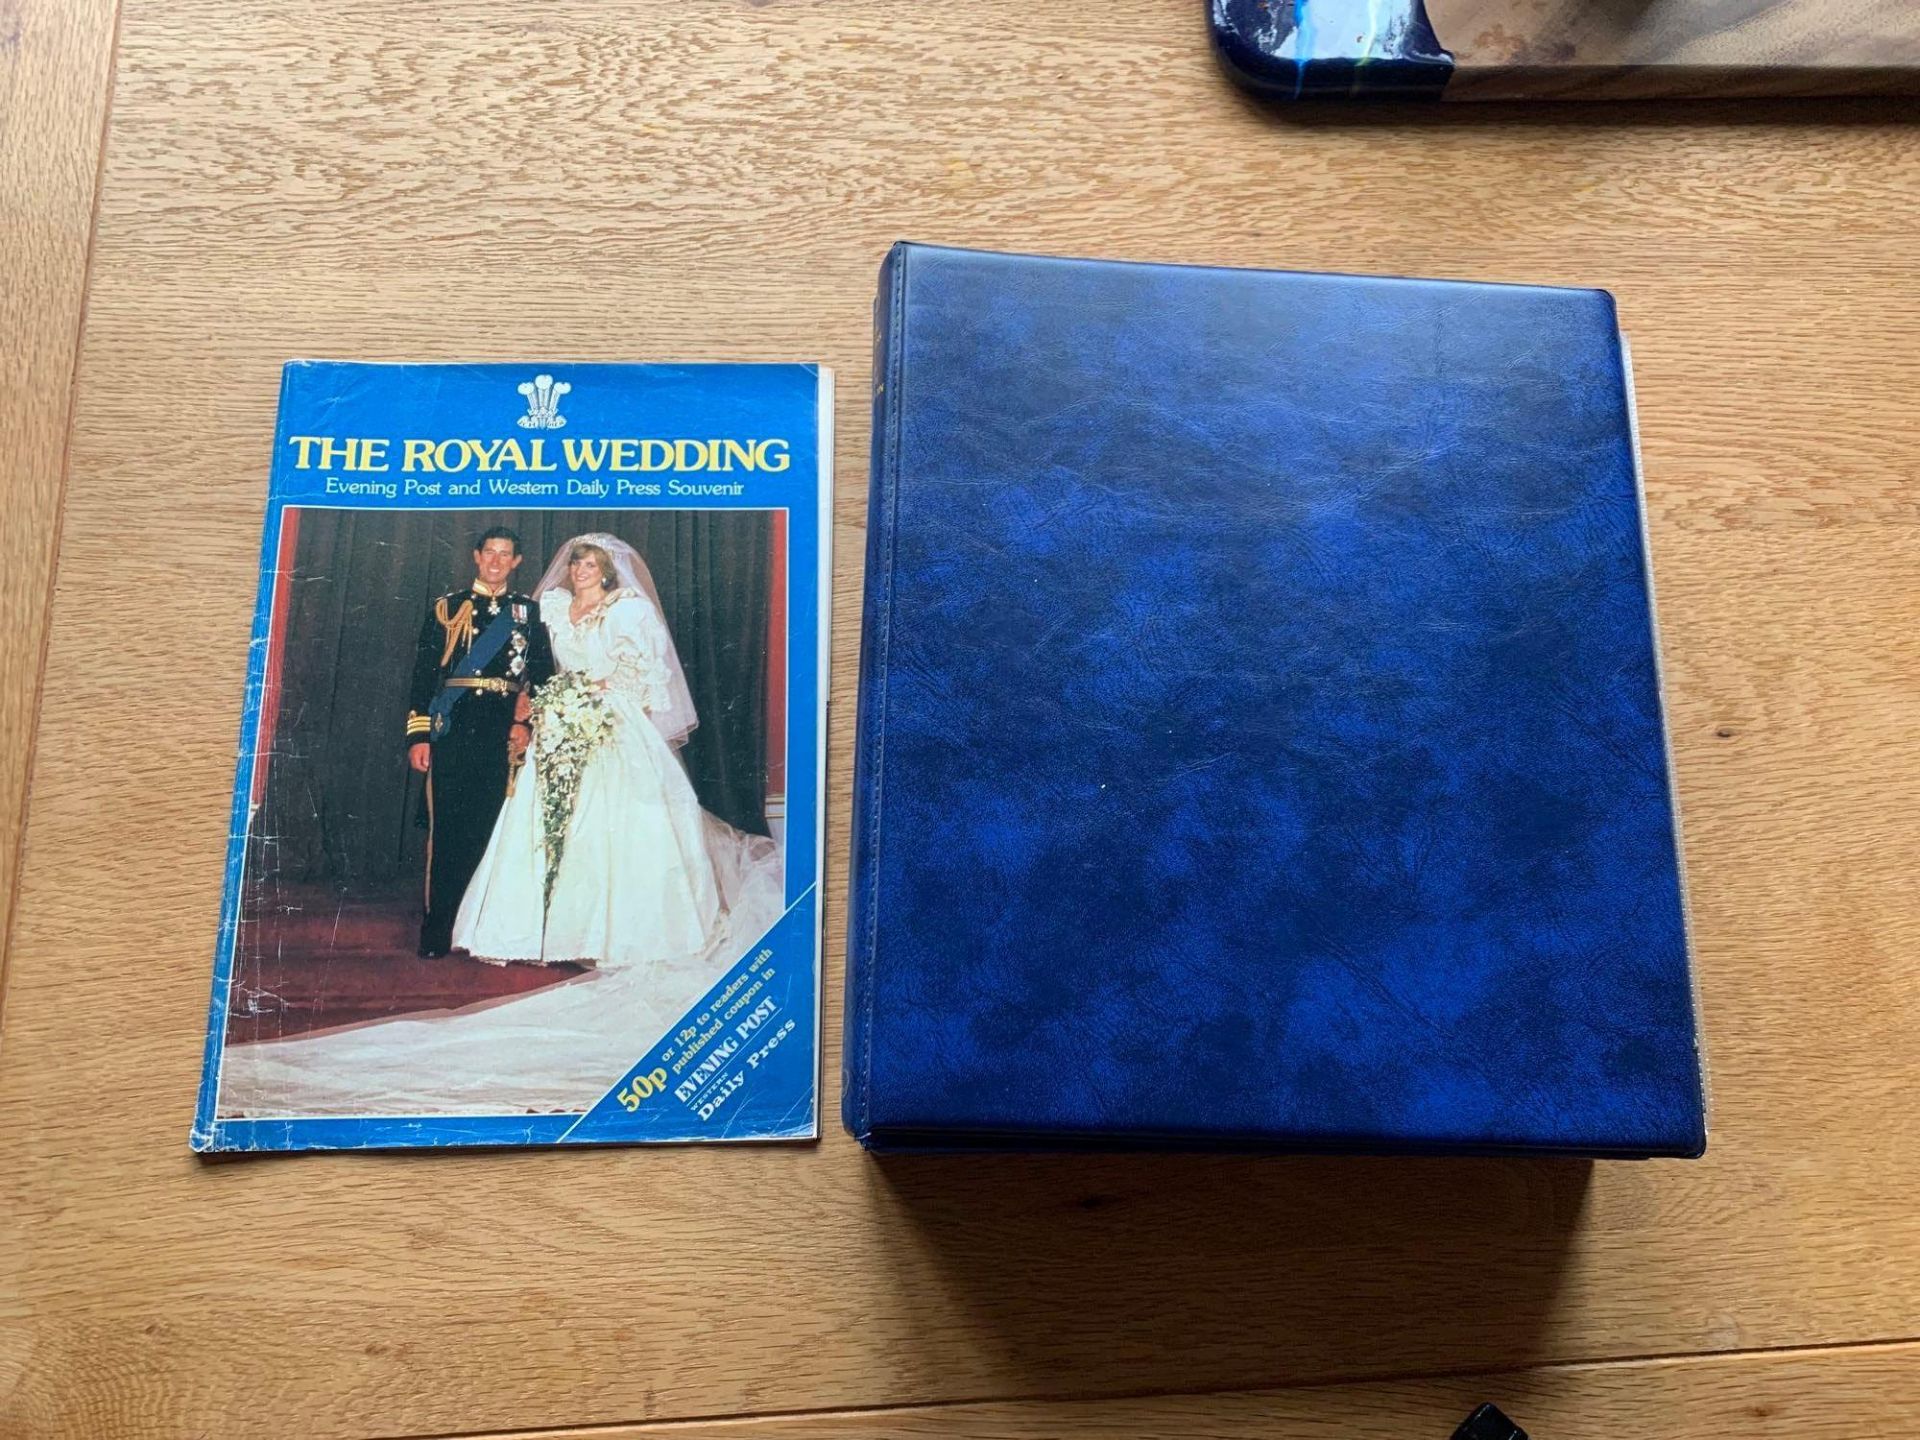 Dianna Princess Of Wales Tribute Collection and The Royal Wedding Evening Post Souvenir Book